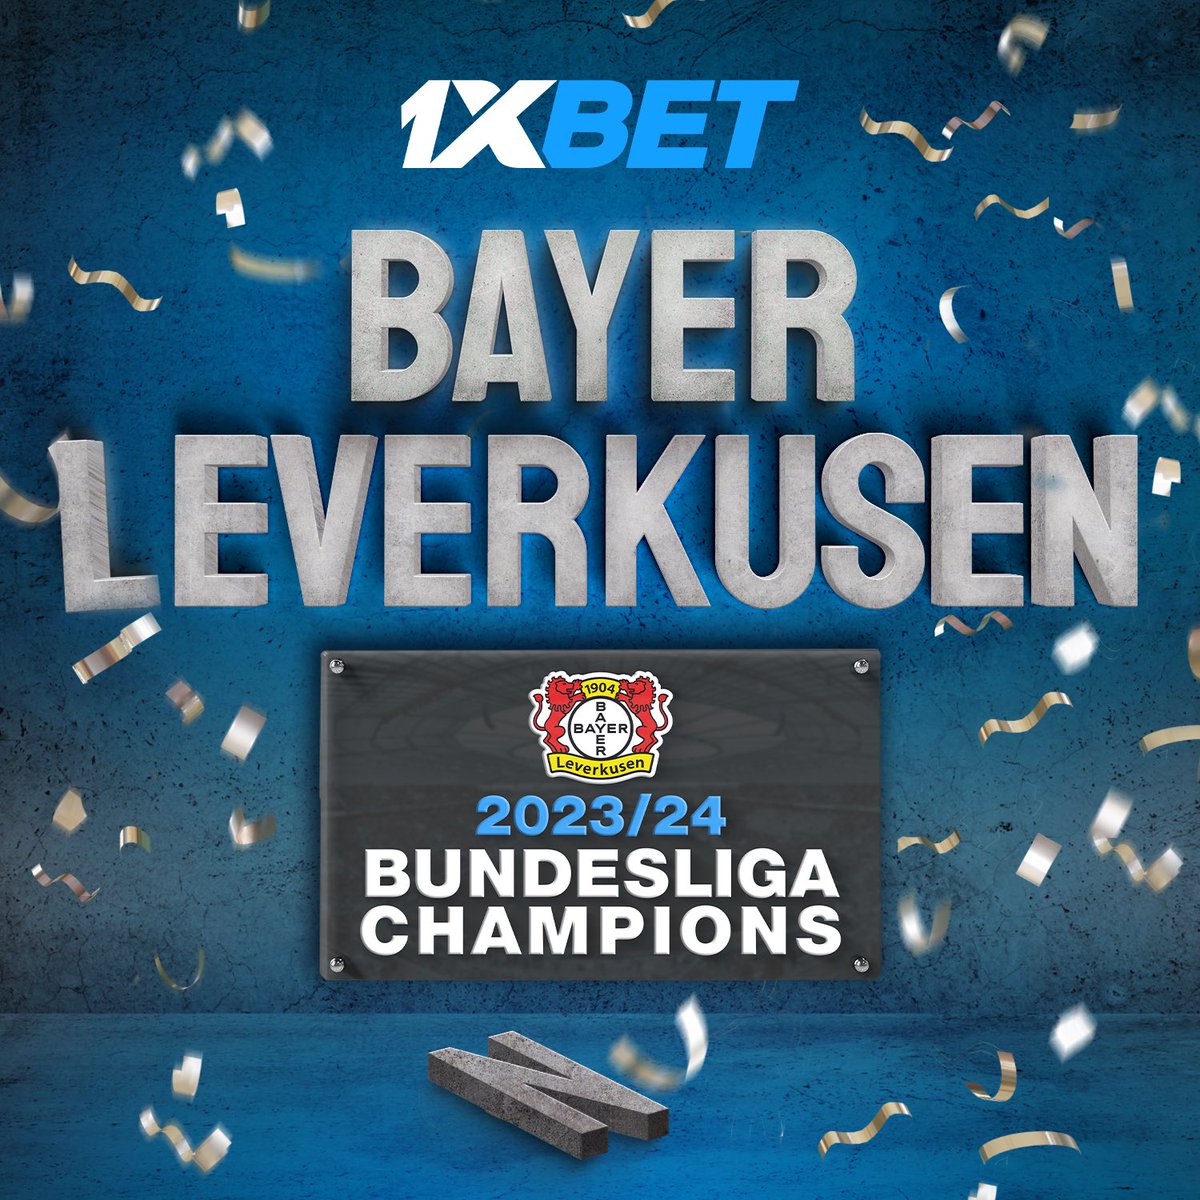 BAYER LEVERKUSEN ARE BUNDESLIGA CHAMPIONS 🇩🇪

The first title in the club's history!

Bundesliga — ✅
German Cup - ⏳
Europa League - ⏳

Put 💙 who believed in Bayer! 

#1xBet #1xBetFootball #1xBetSport #Bundesliga #B04SNW #Bayer04 #ForOurDream